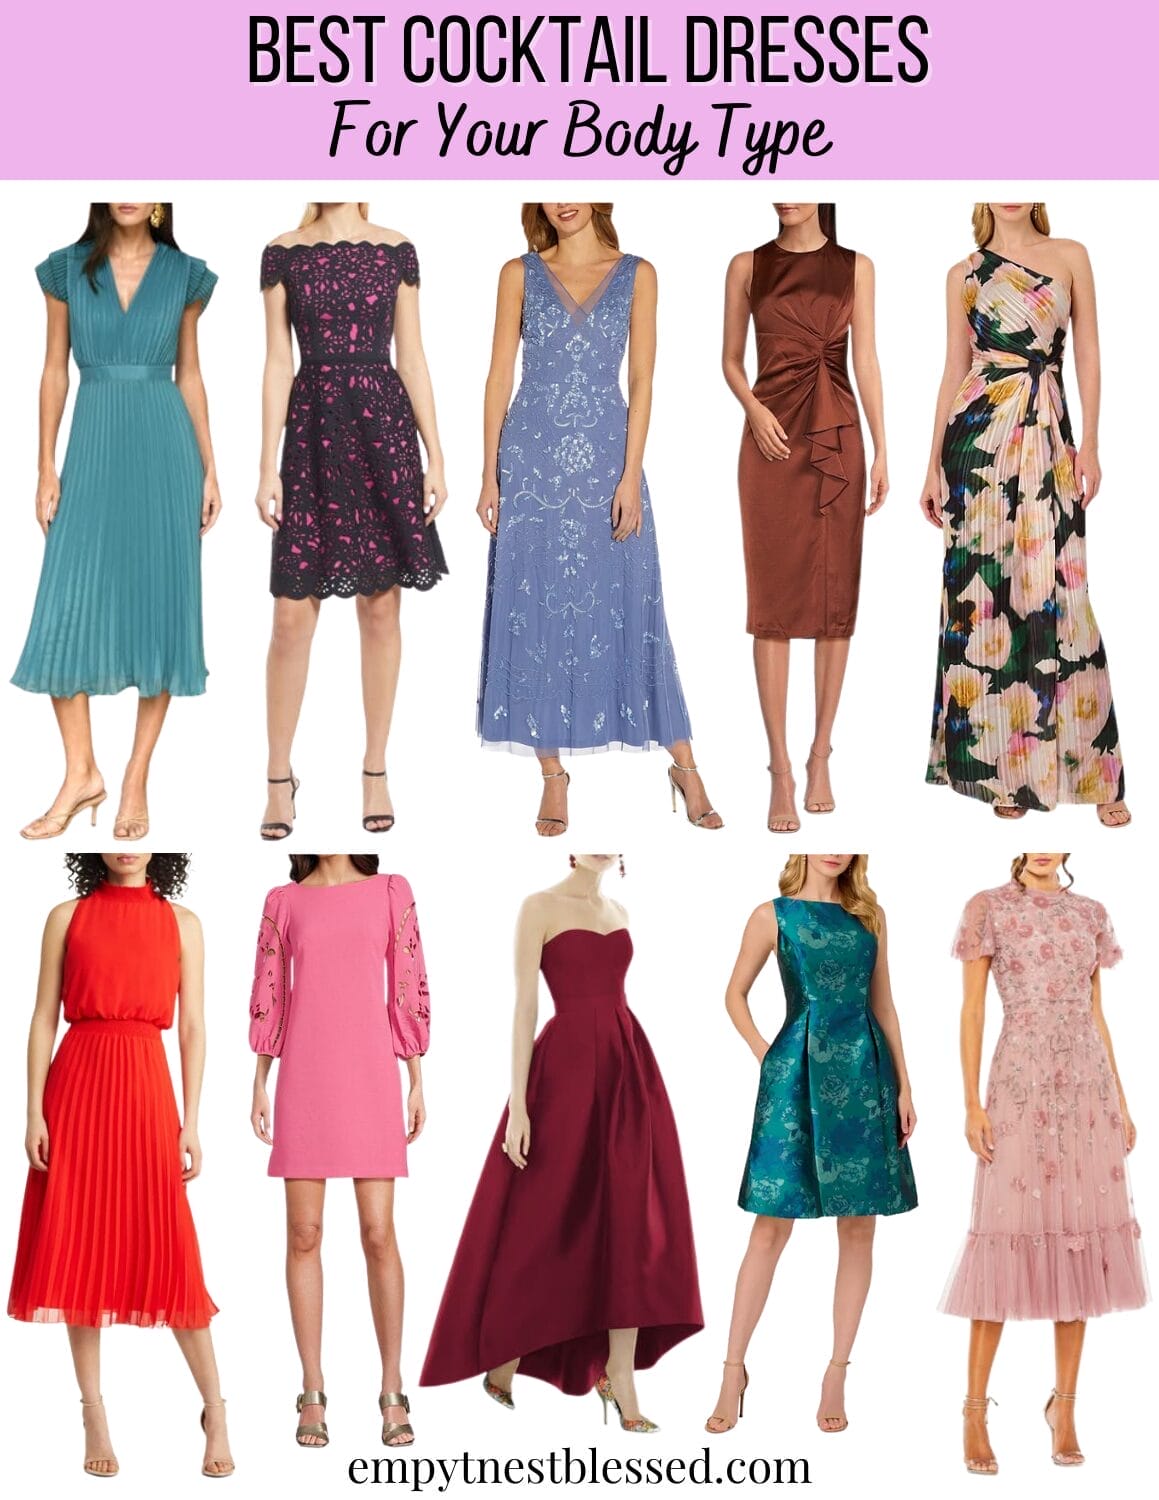 Cocktail Dresses For Women Over 50